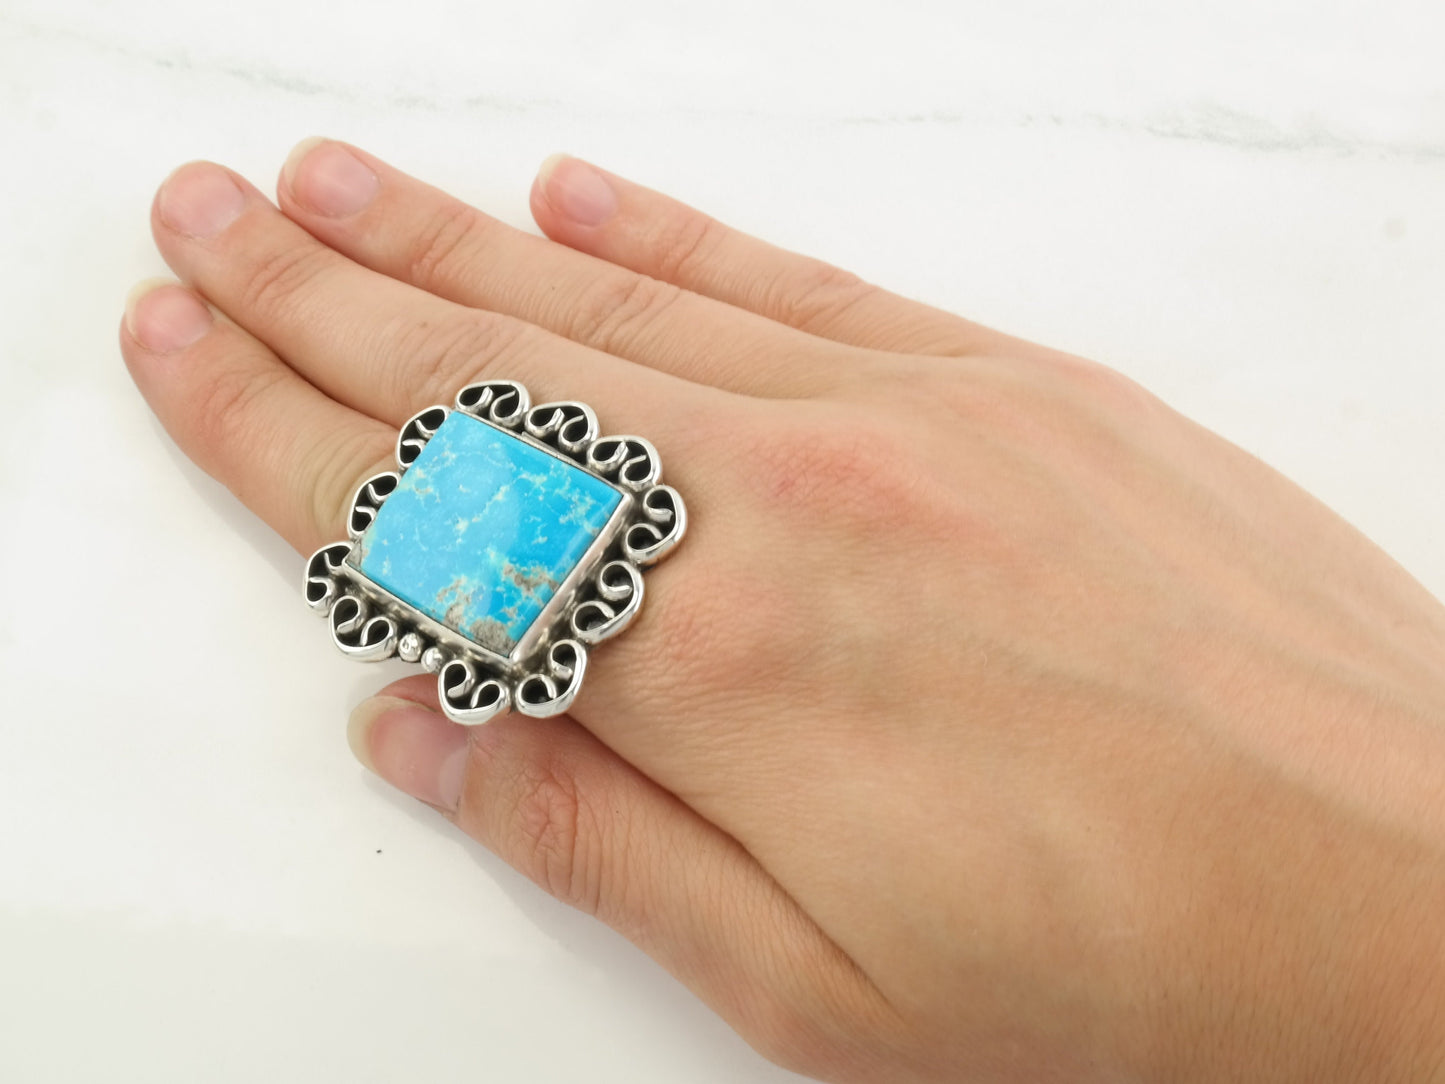 Large Southwest Silver Ring Square Turquoise Sterling Size 8 1/2